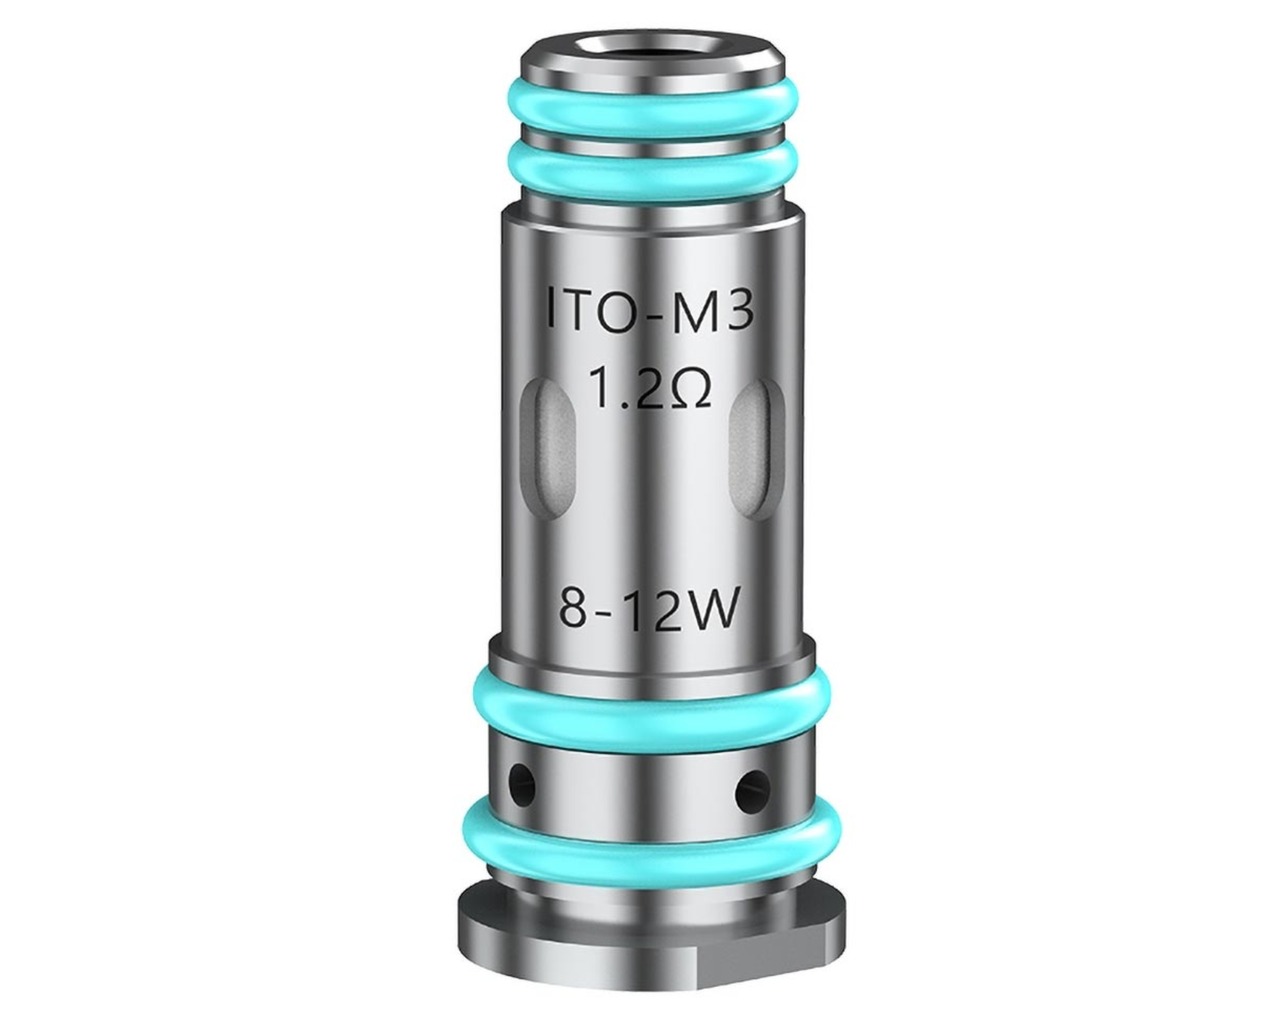 Voopoo ITO M3 Mesh Coil 1.2 Ohm